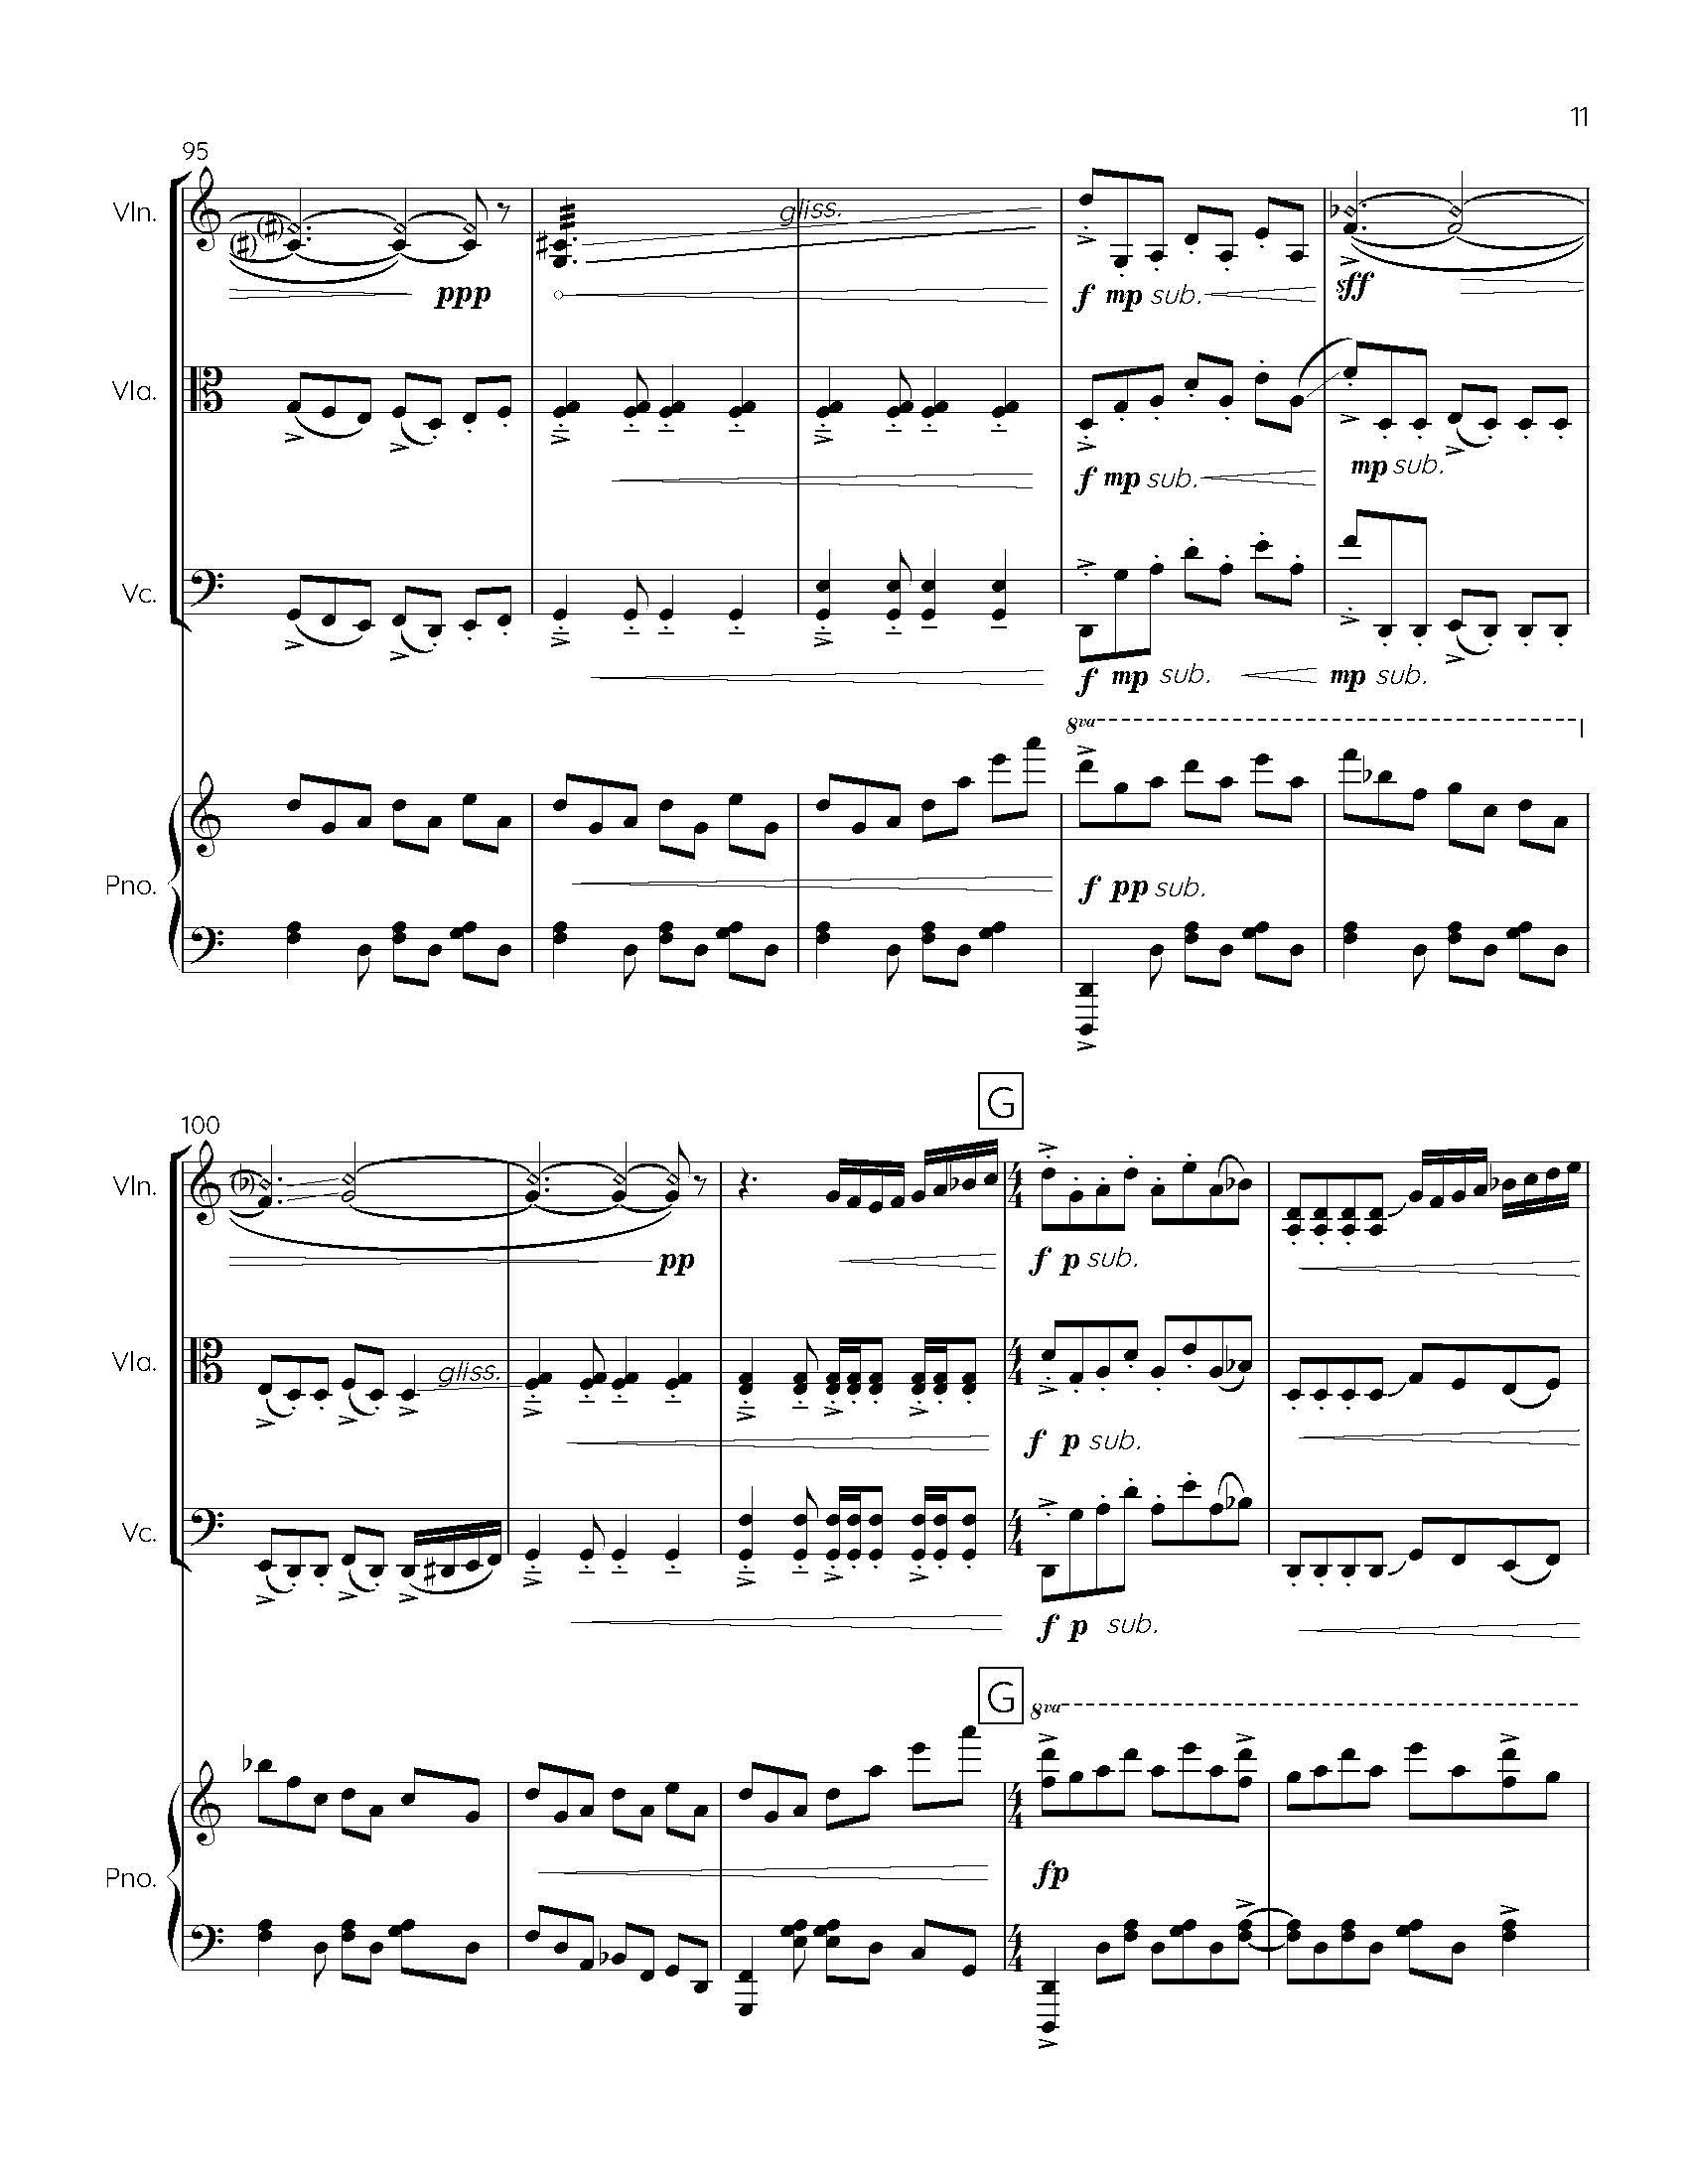 I S L A N D I - Complete Score_Page_17.jpg